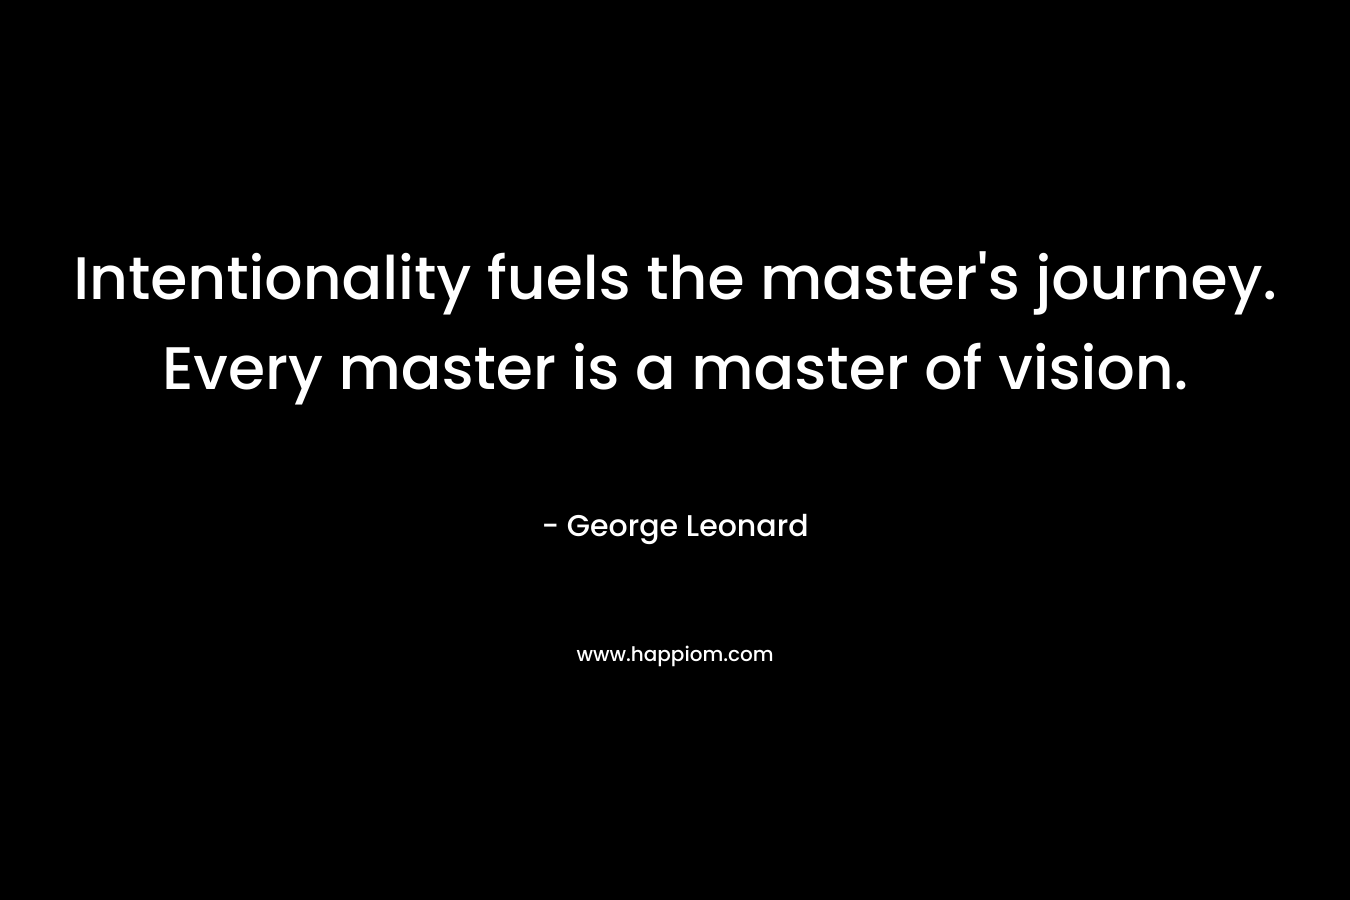 Intentionality fuels the master's journey. Every master is a master of vision.